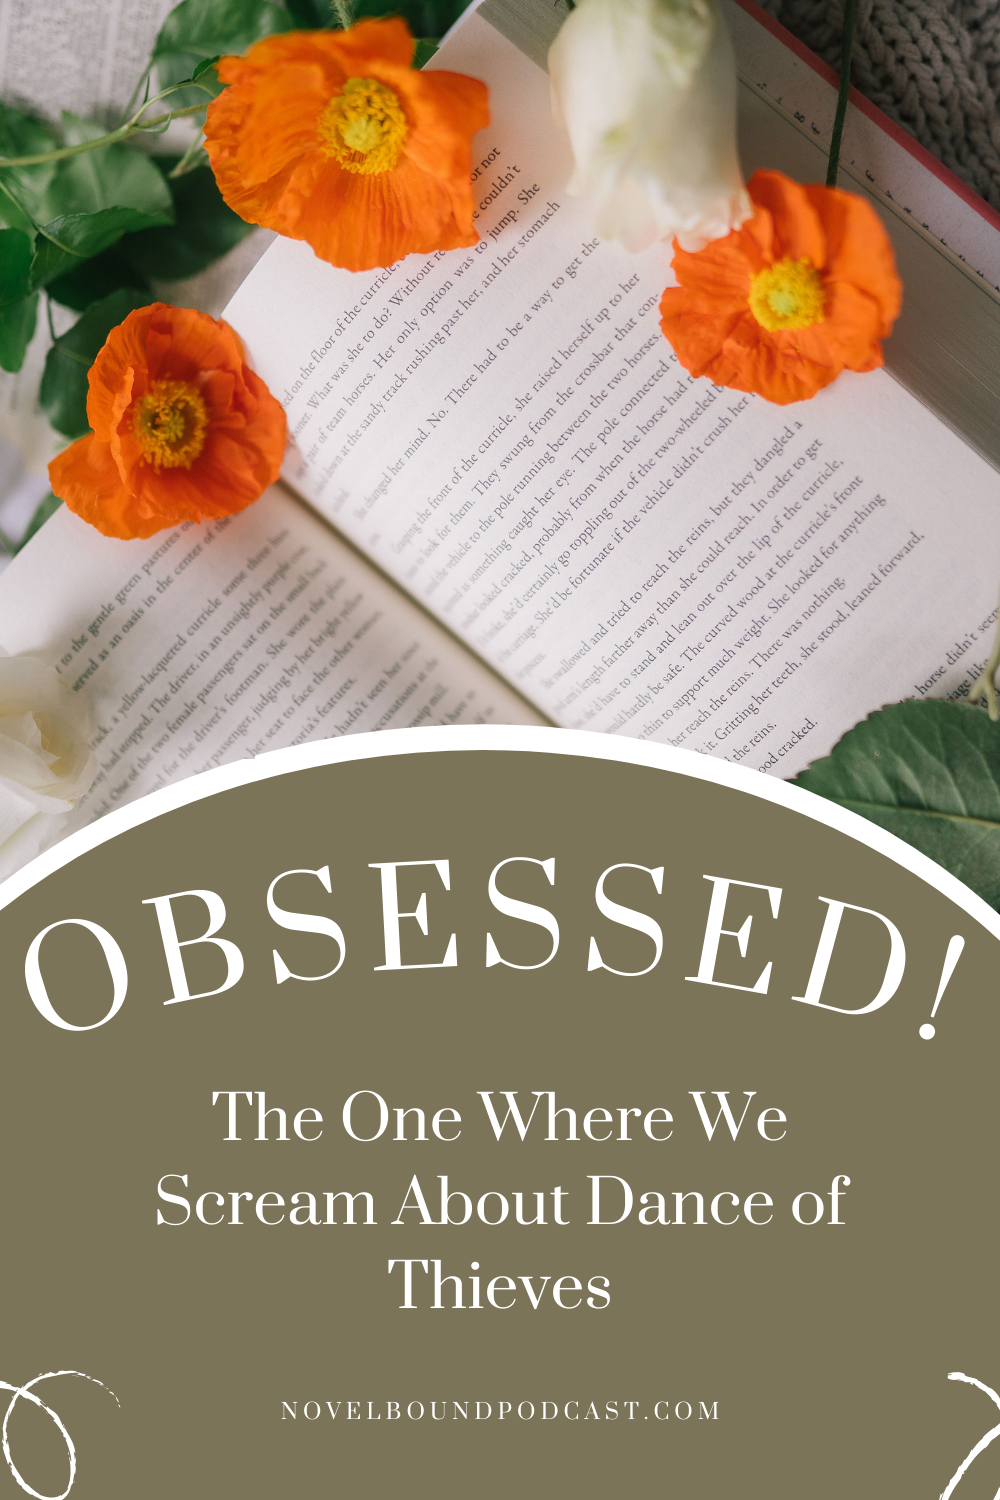 Obsessed! The one Where We Scream Abount Dance of Thieves.